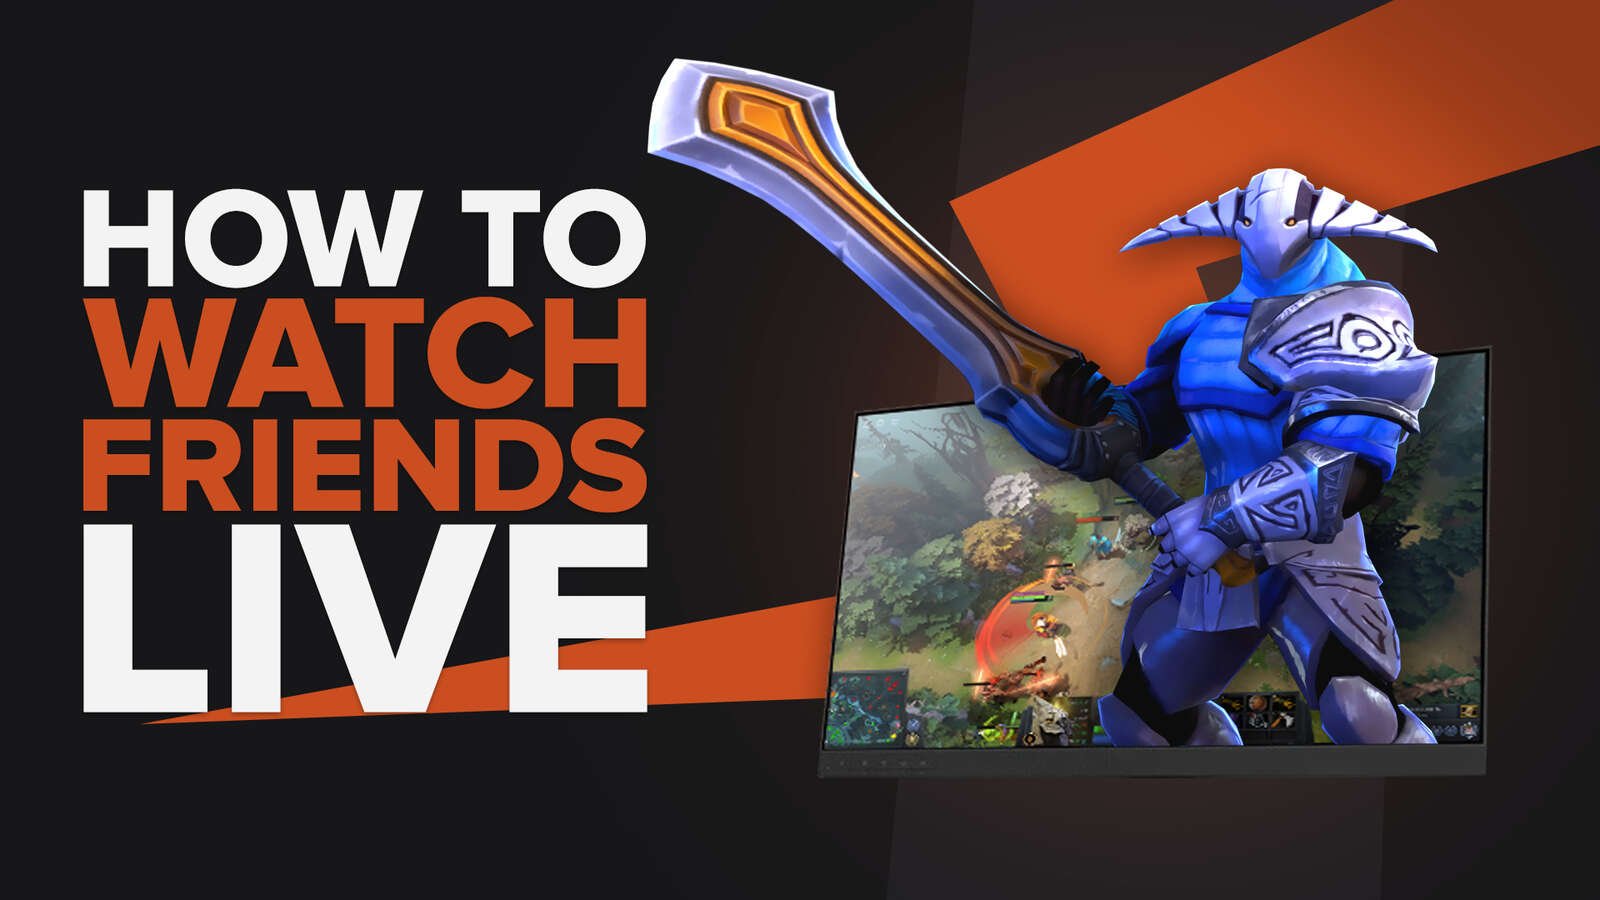 How to Watch Friends Live Game in Dota 2 [4 Methods]